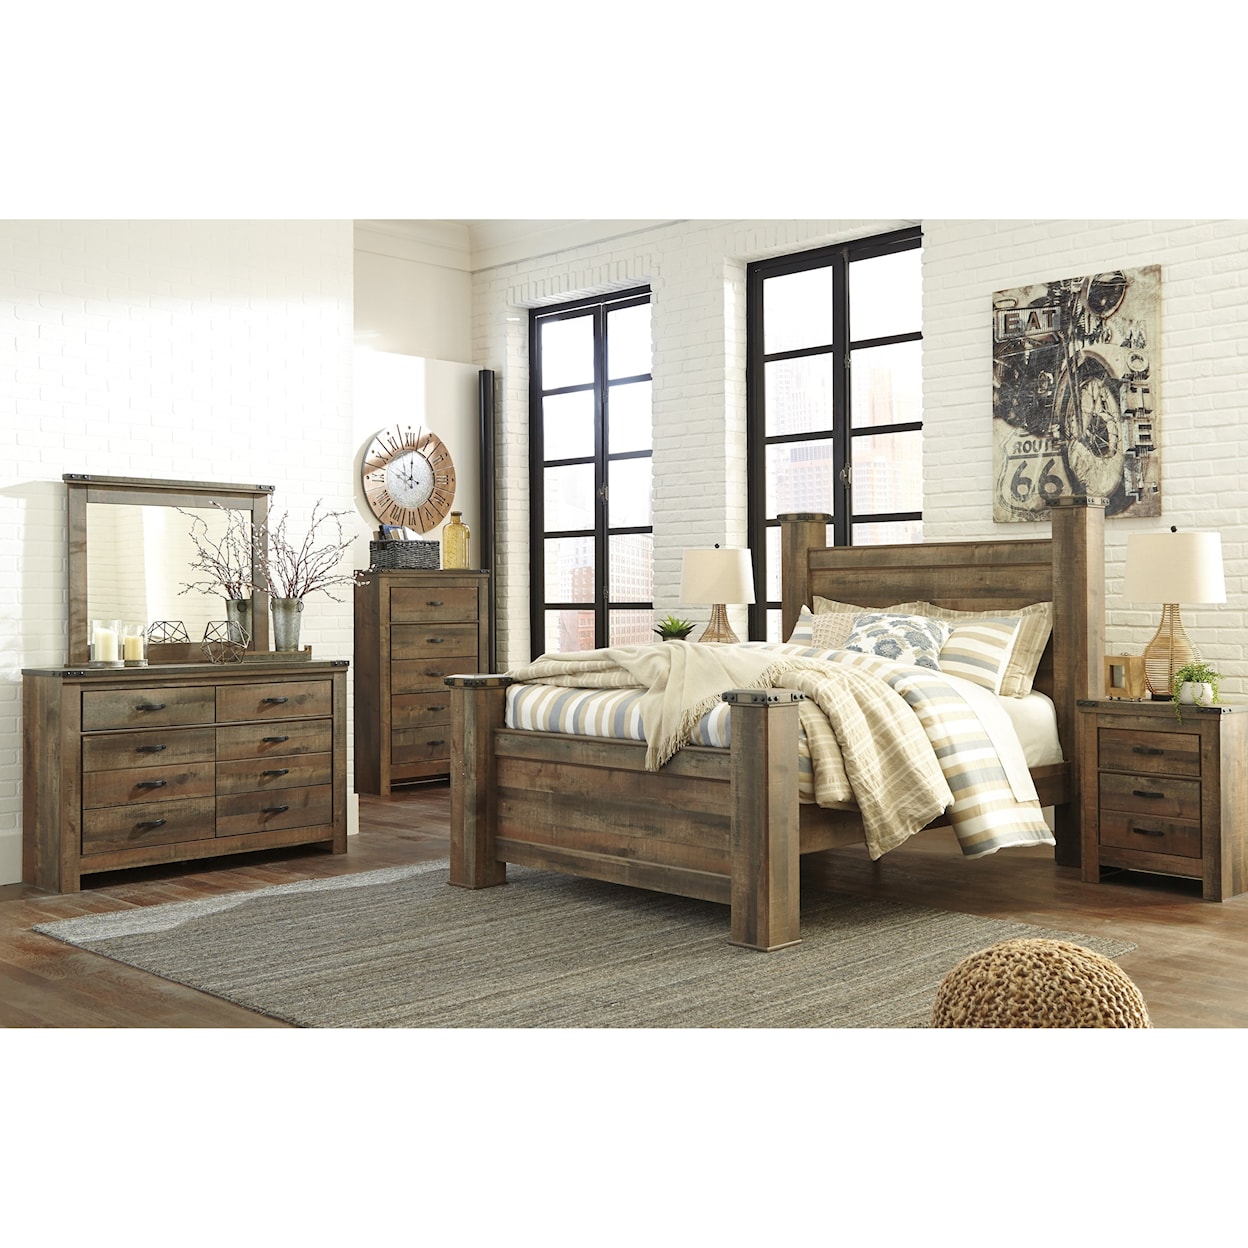 Ashley Signature Design Trinell Queen Poster Bed